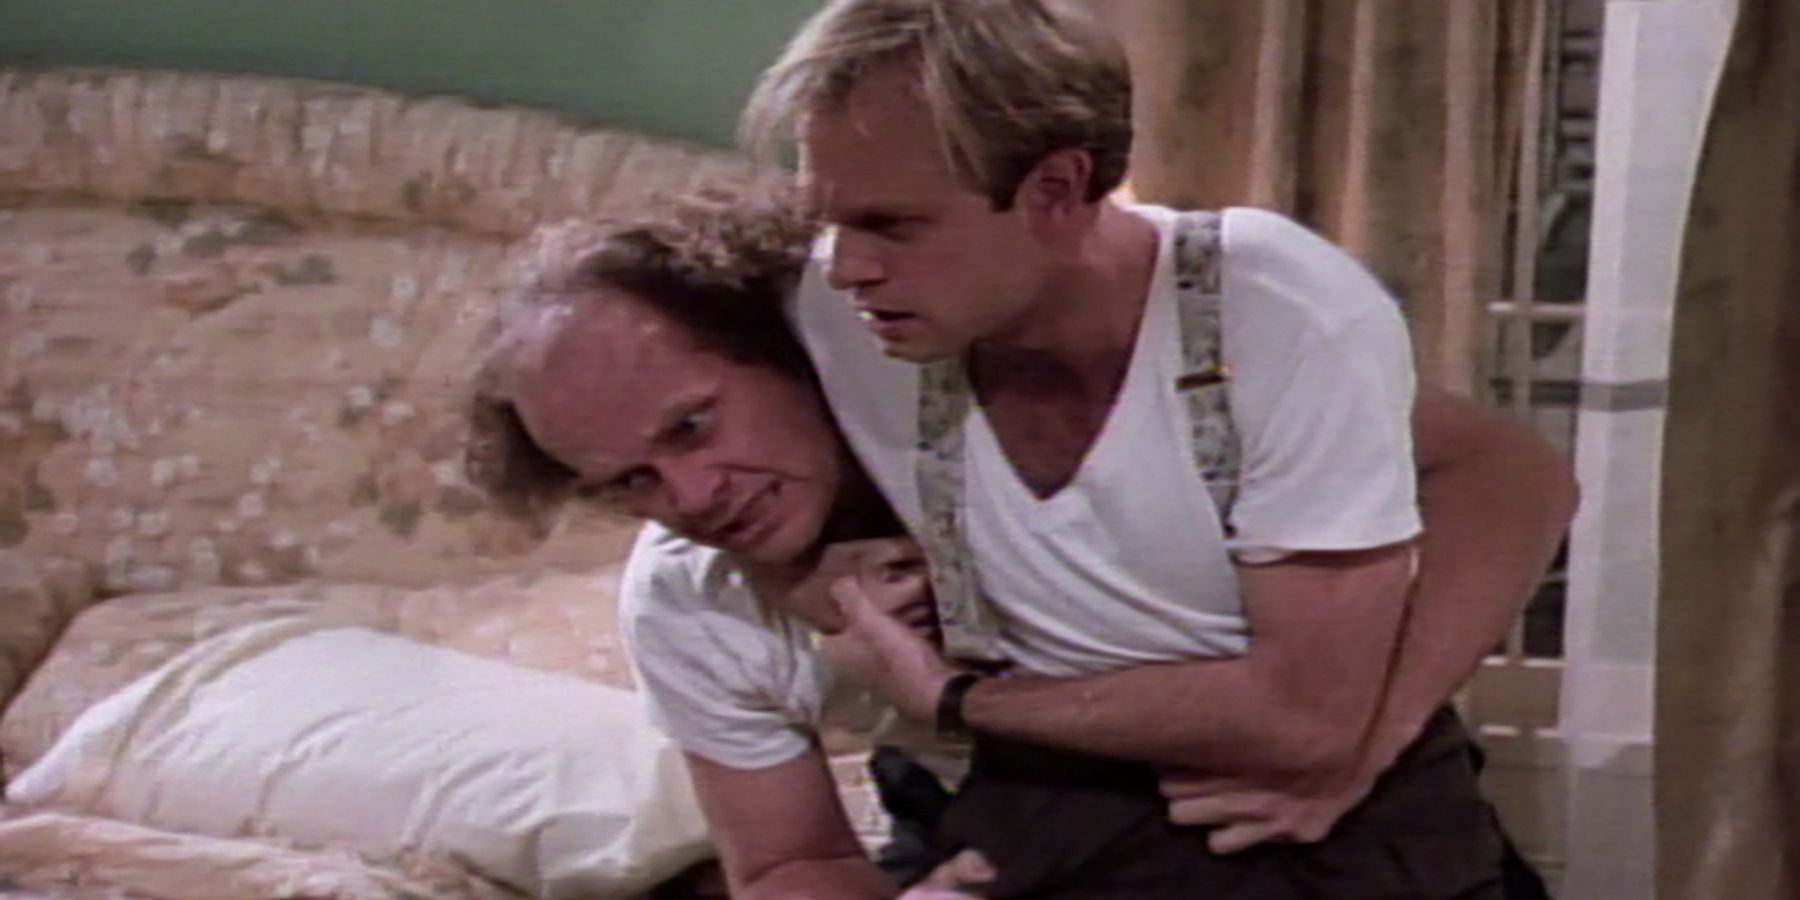 Frasier and Niles get into a physical fight